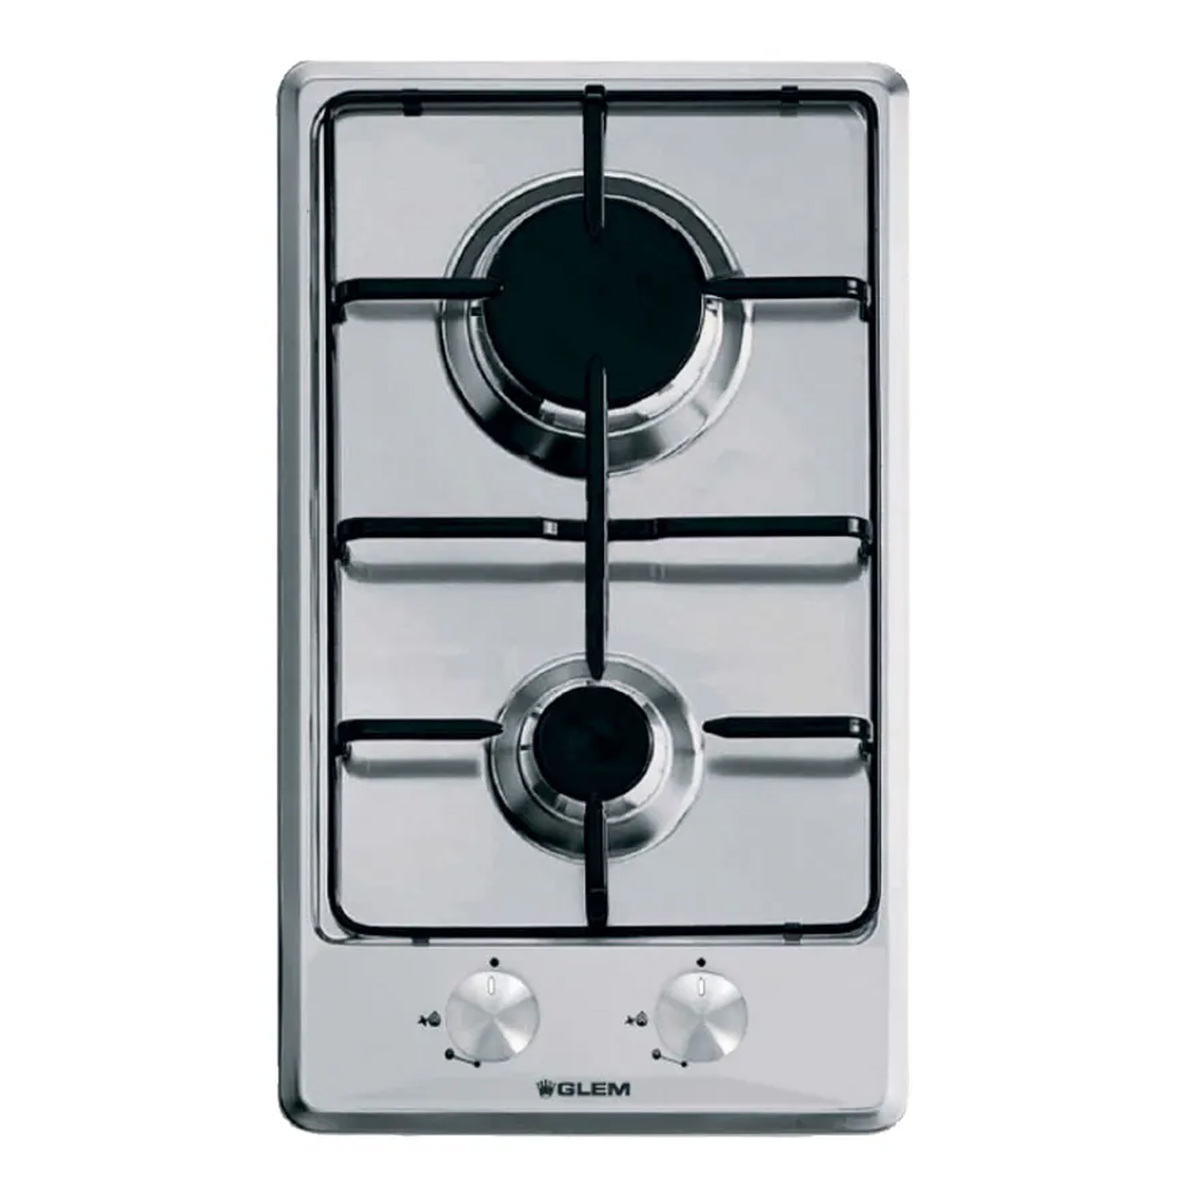 Glemgas Built-in Cooking Hob, 2 Gas Burners, 30 cm, Stainless Steel, GT32IX